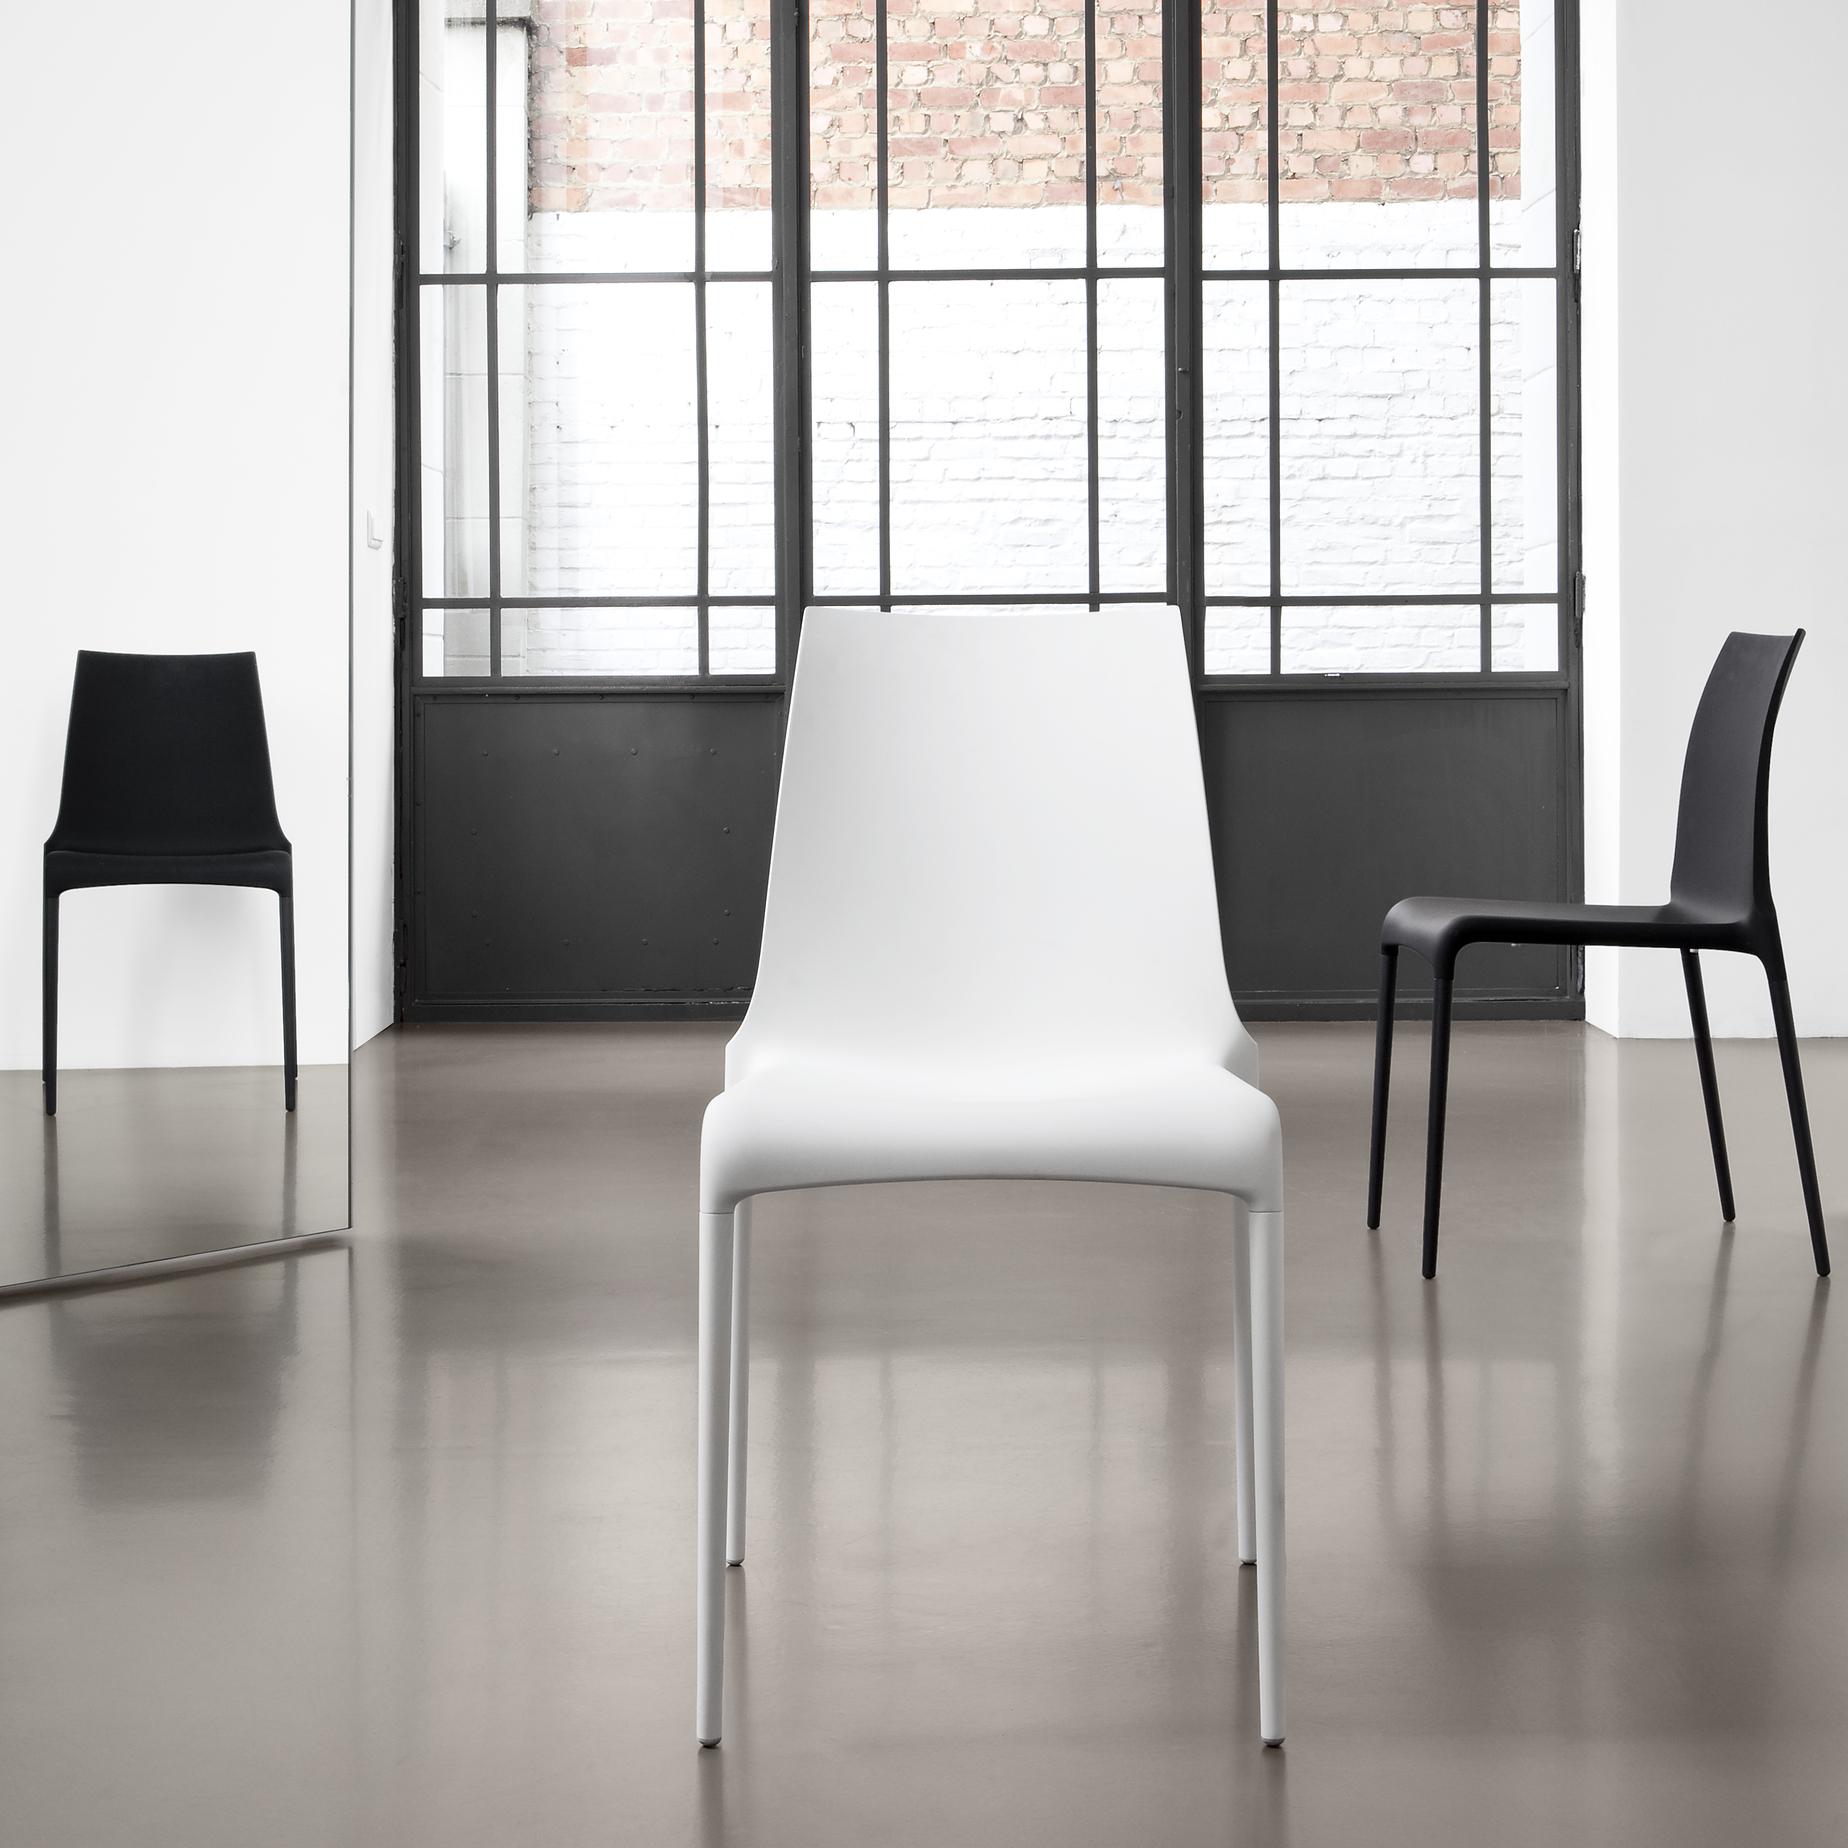 Petra Chairs From Designer Claudio Dondoli Marco Pocci Ligne Roset Official Site